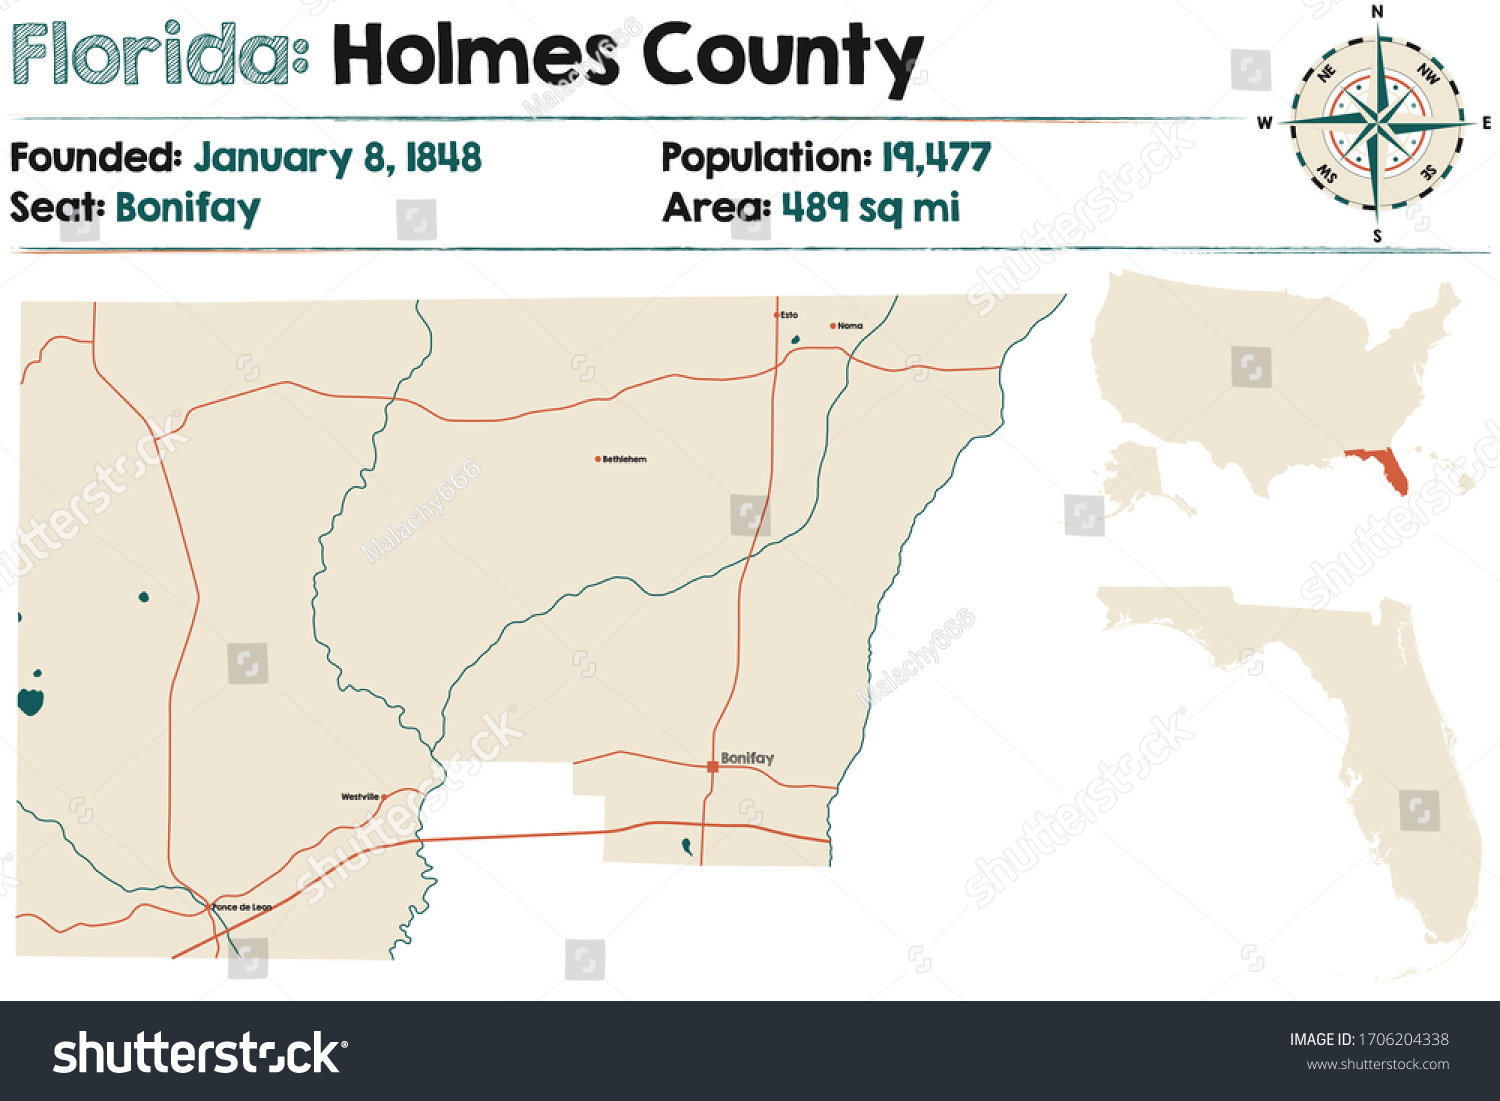 Large And Detailed Map Of Holmes County In Royalty Free Stock Vector 1706204338 6063